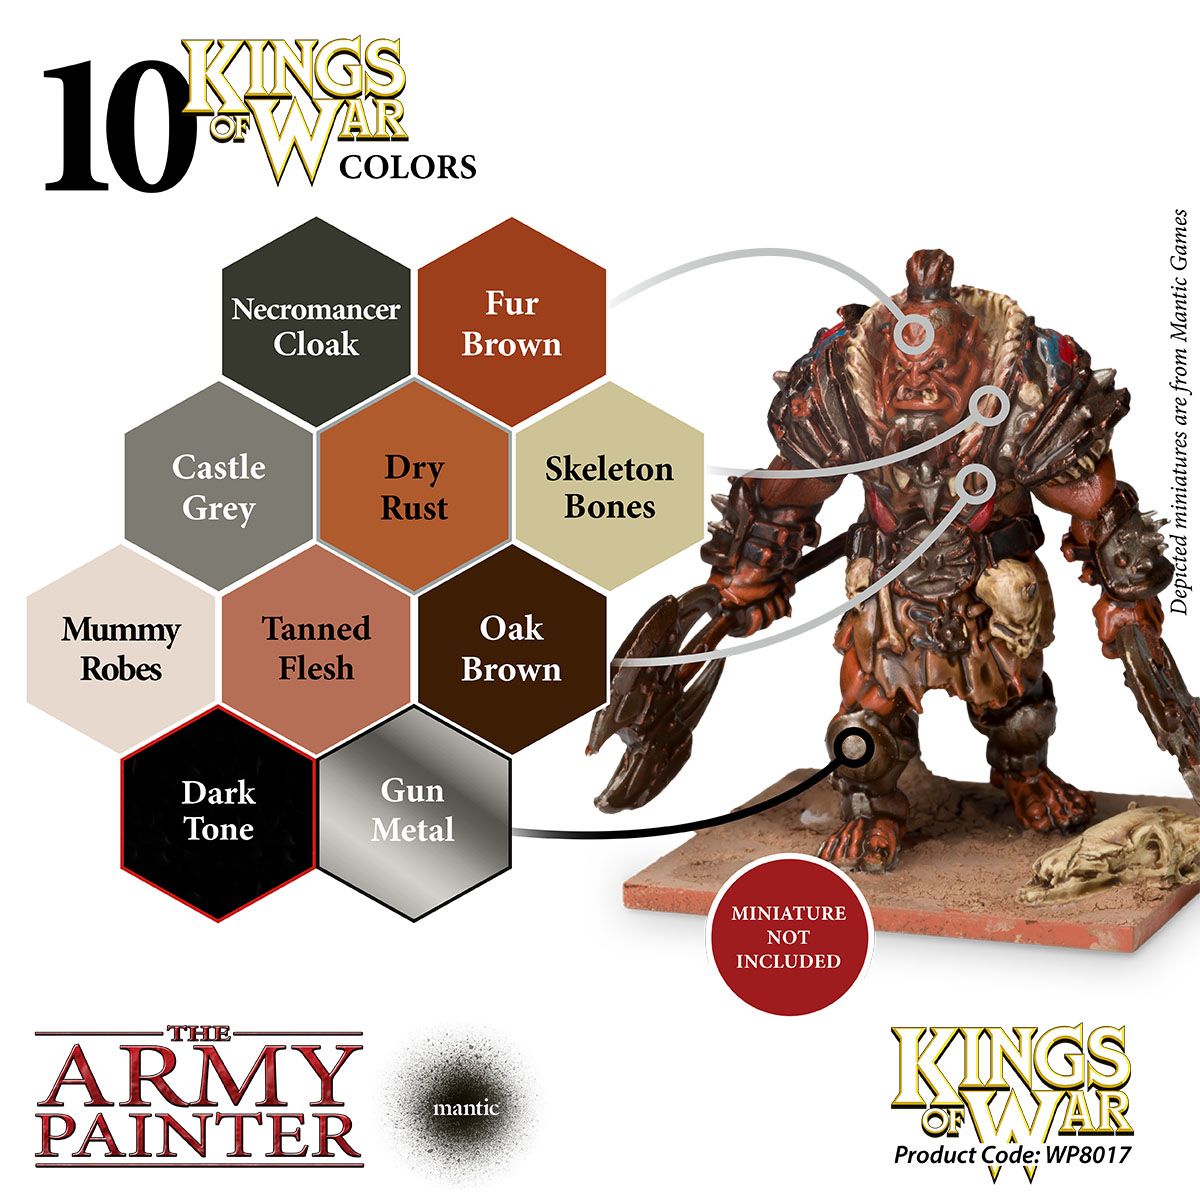 The Army Painter Kings of War Ogres Miniatures Paint Set - Highly Pigmented Acrylic Model Paint Set - 10 Miniature Paints in 18ml Dropper Bottles